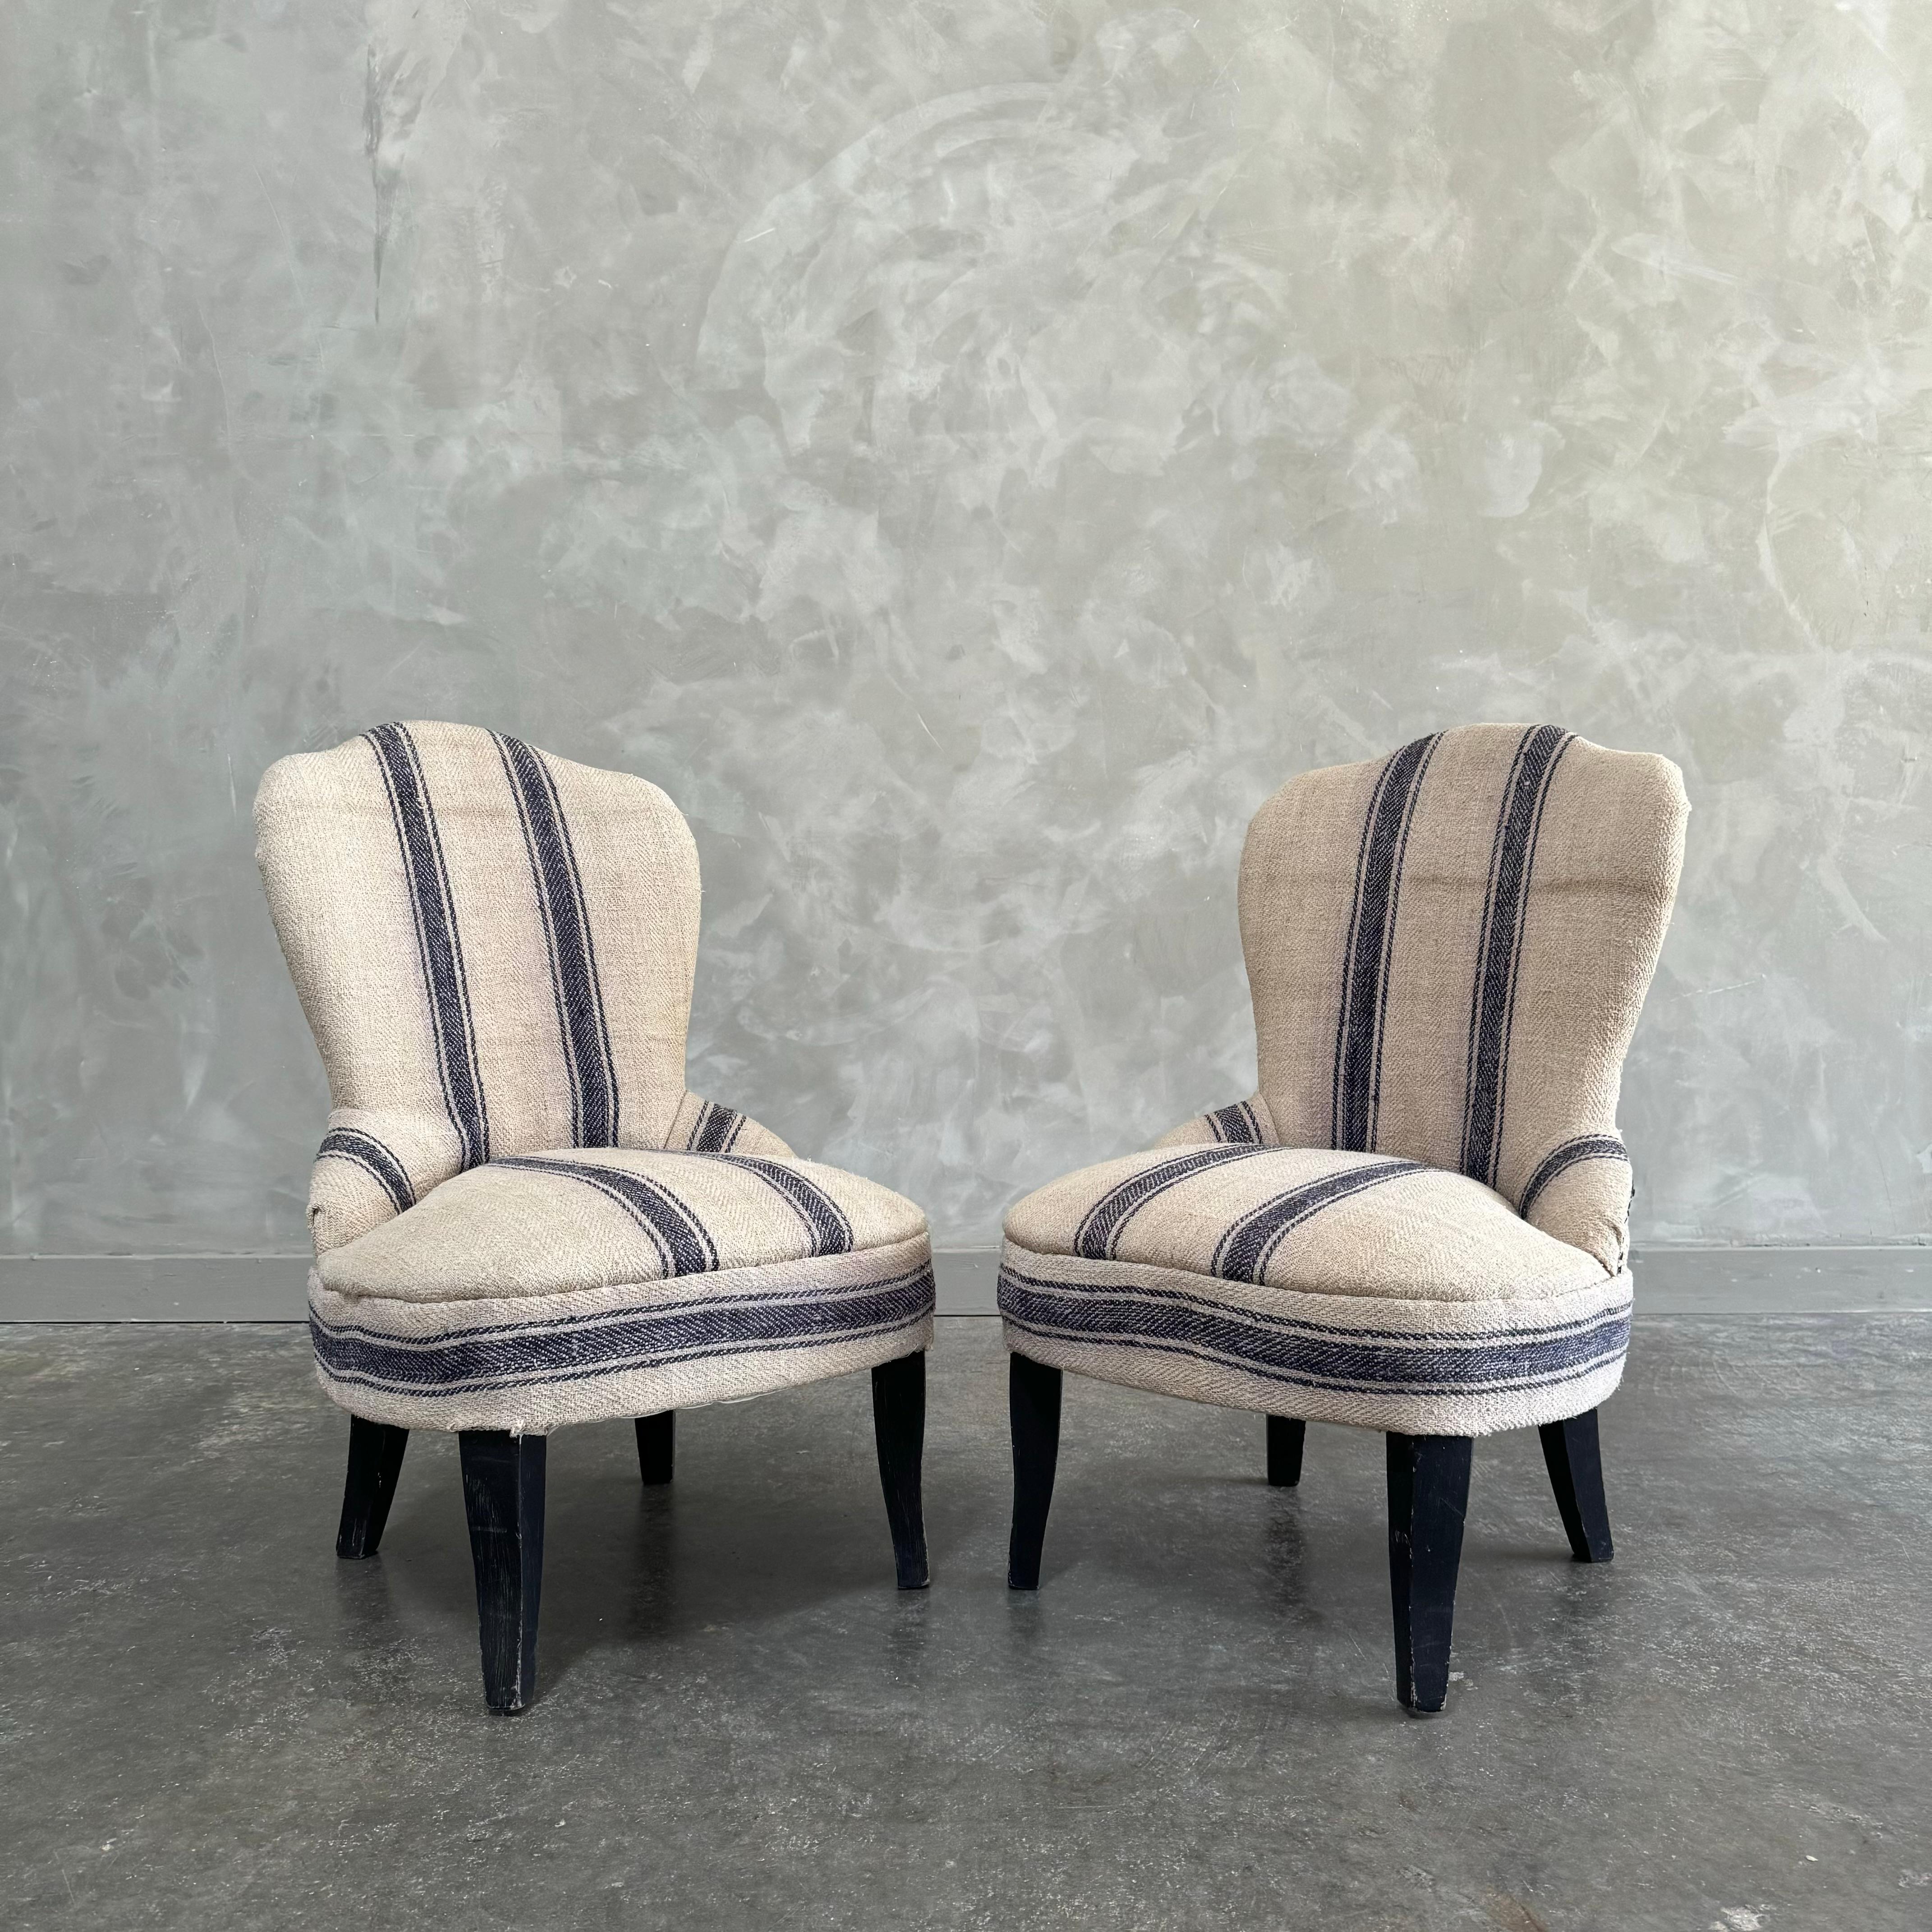 European Pair of small vintage chairs For Sale